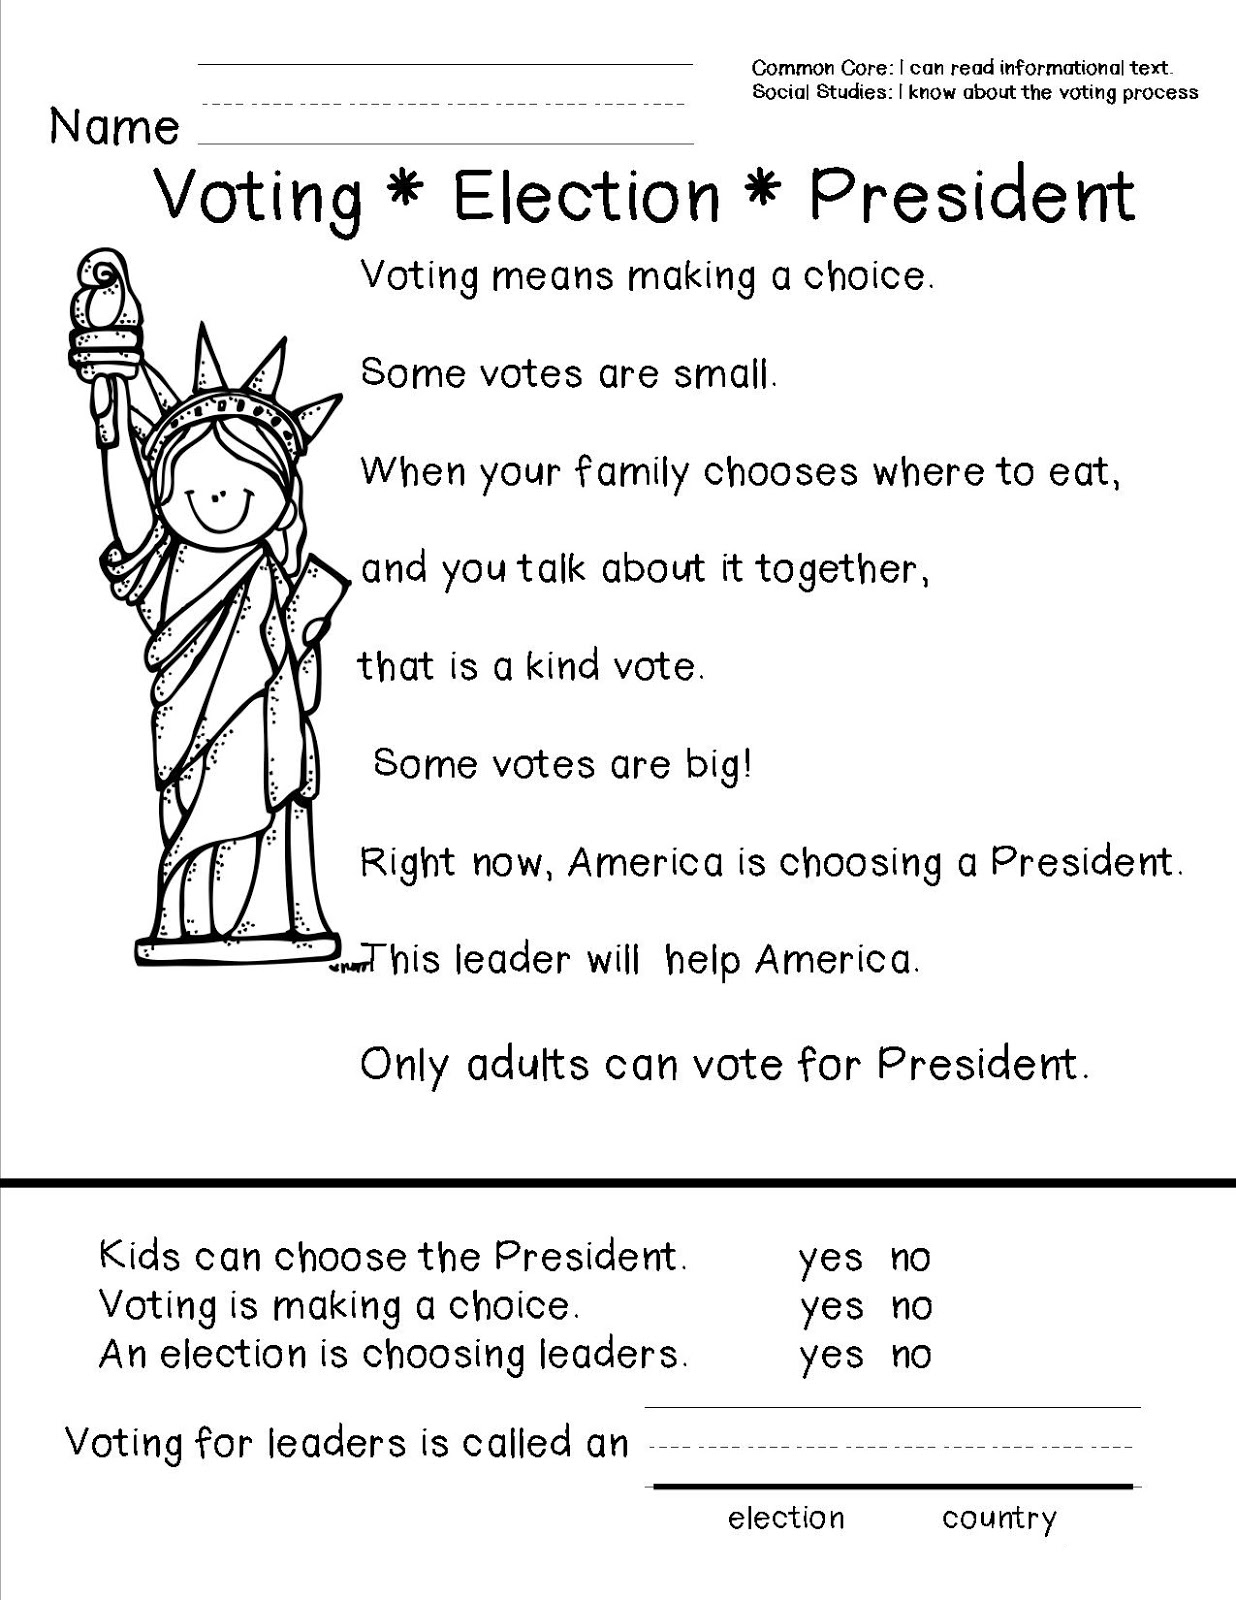 presidents-day-worksheets-best-coloring-pages-for-kids